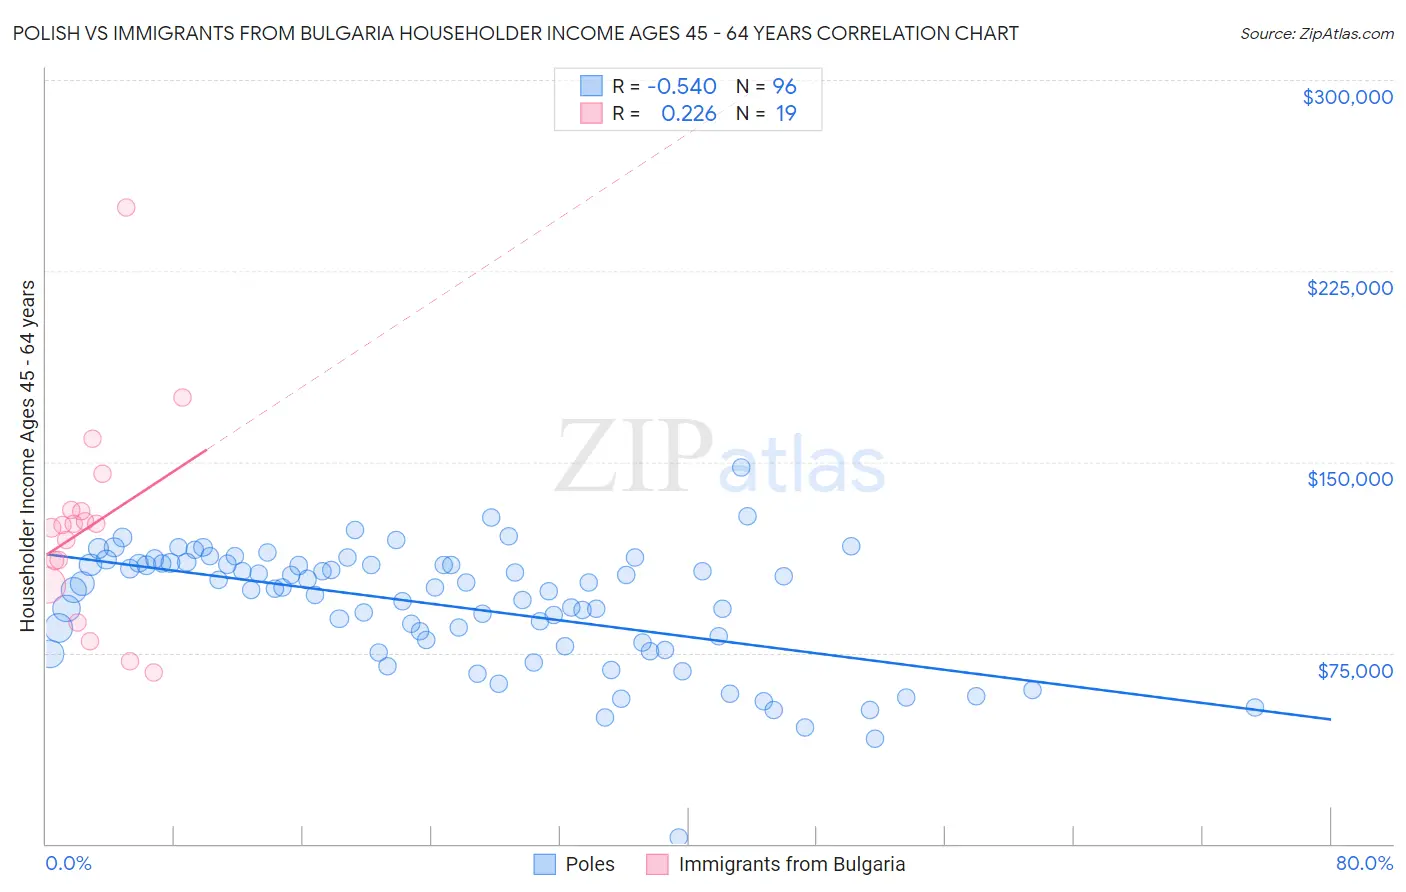 Polish vs Immigrants from Bulgaria Householder Income Ages 45 - 64 years